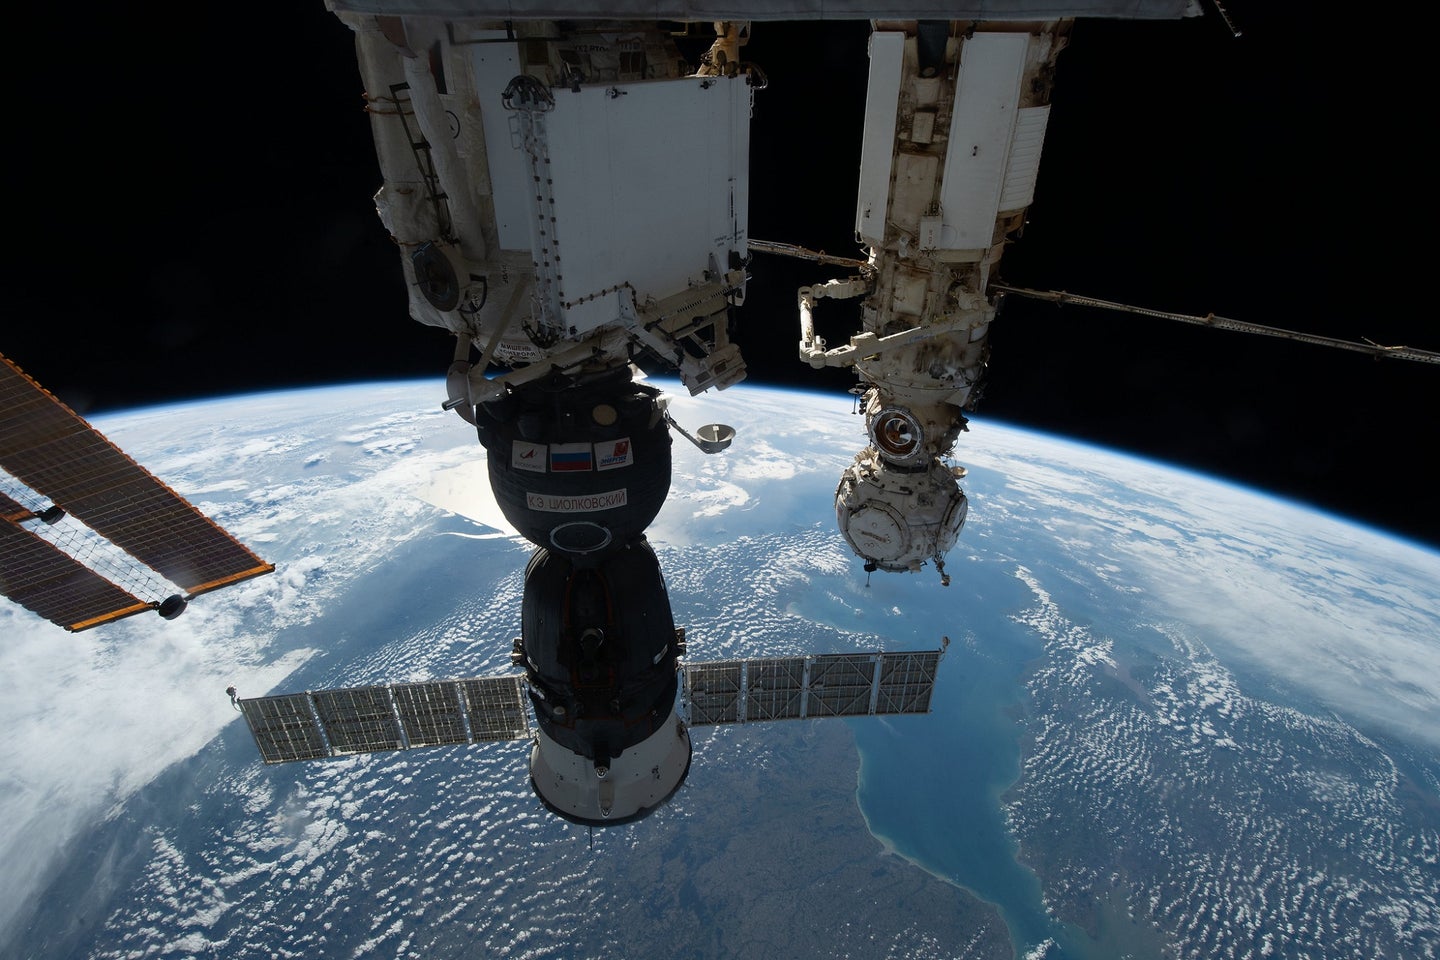 Russian spacecraft Soyuz MS-22 docked on the International Space Station while orbiting Earth